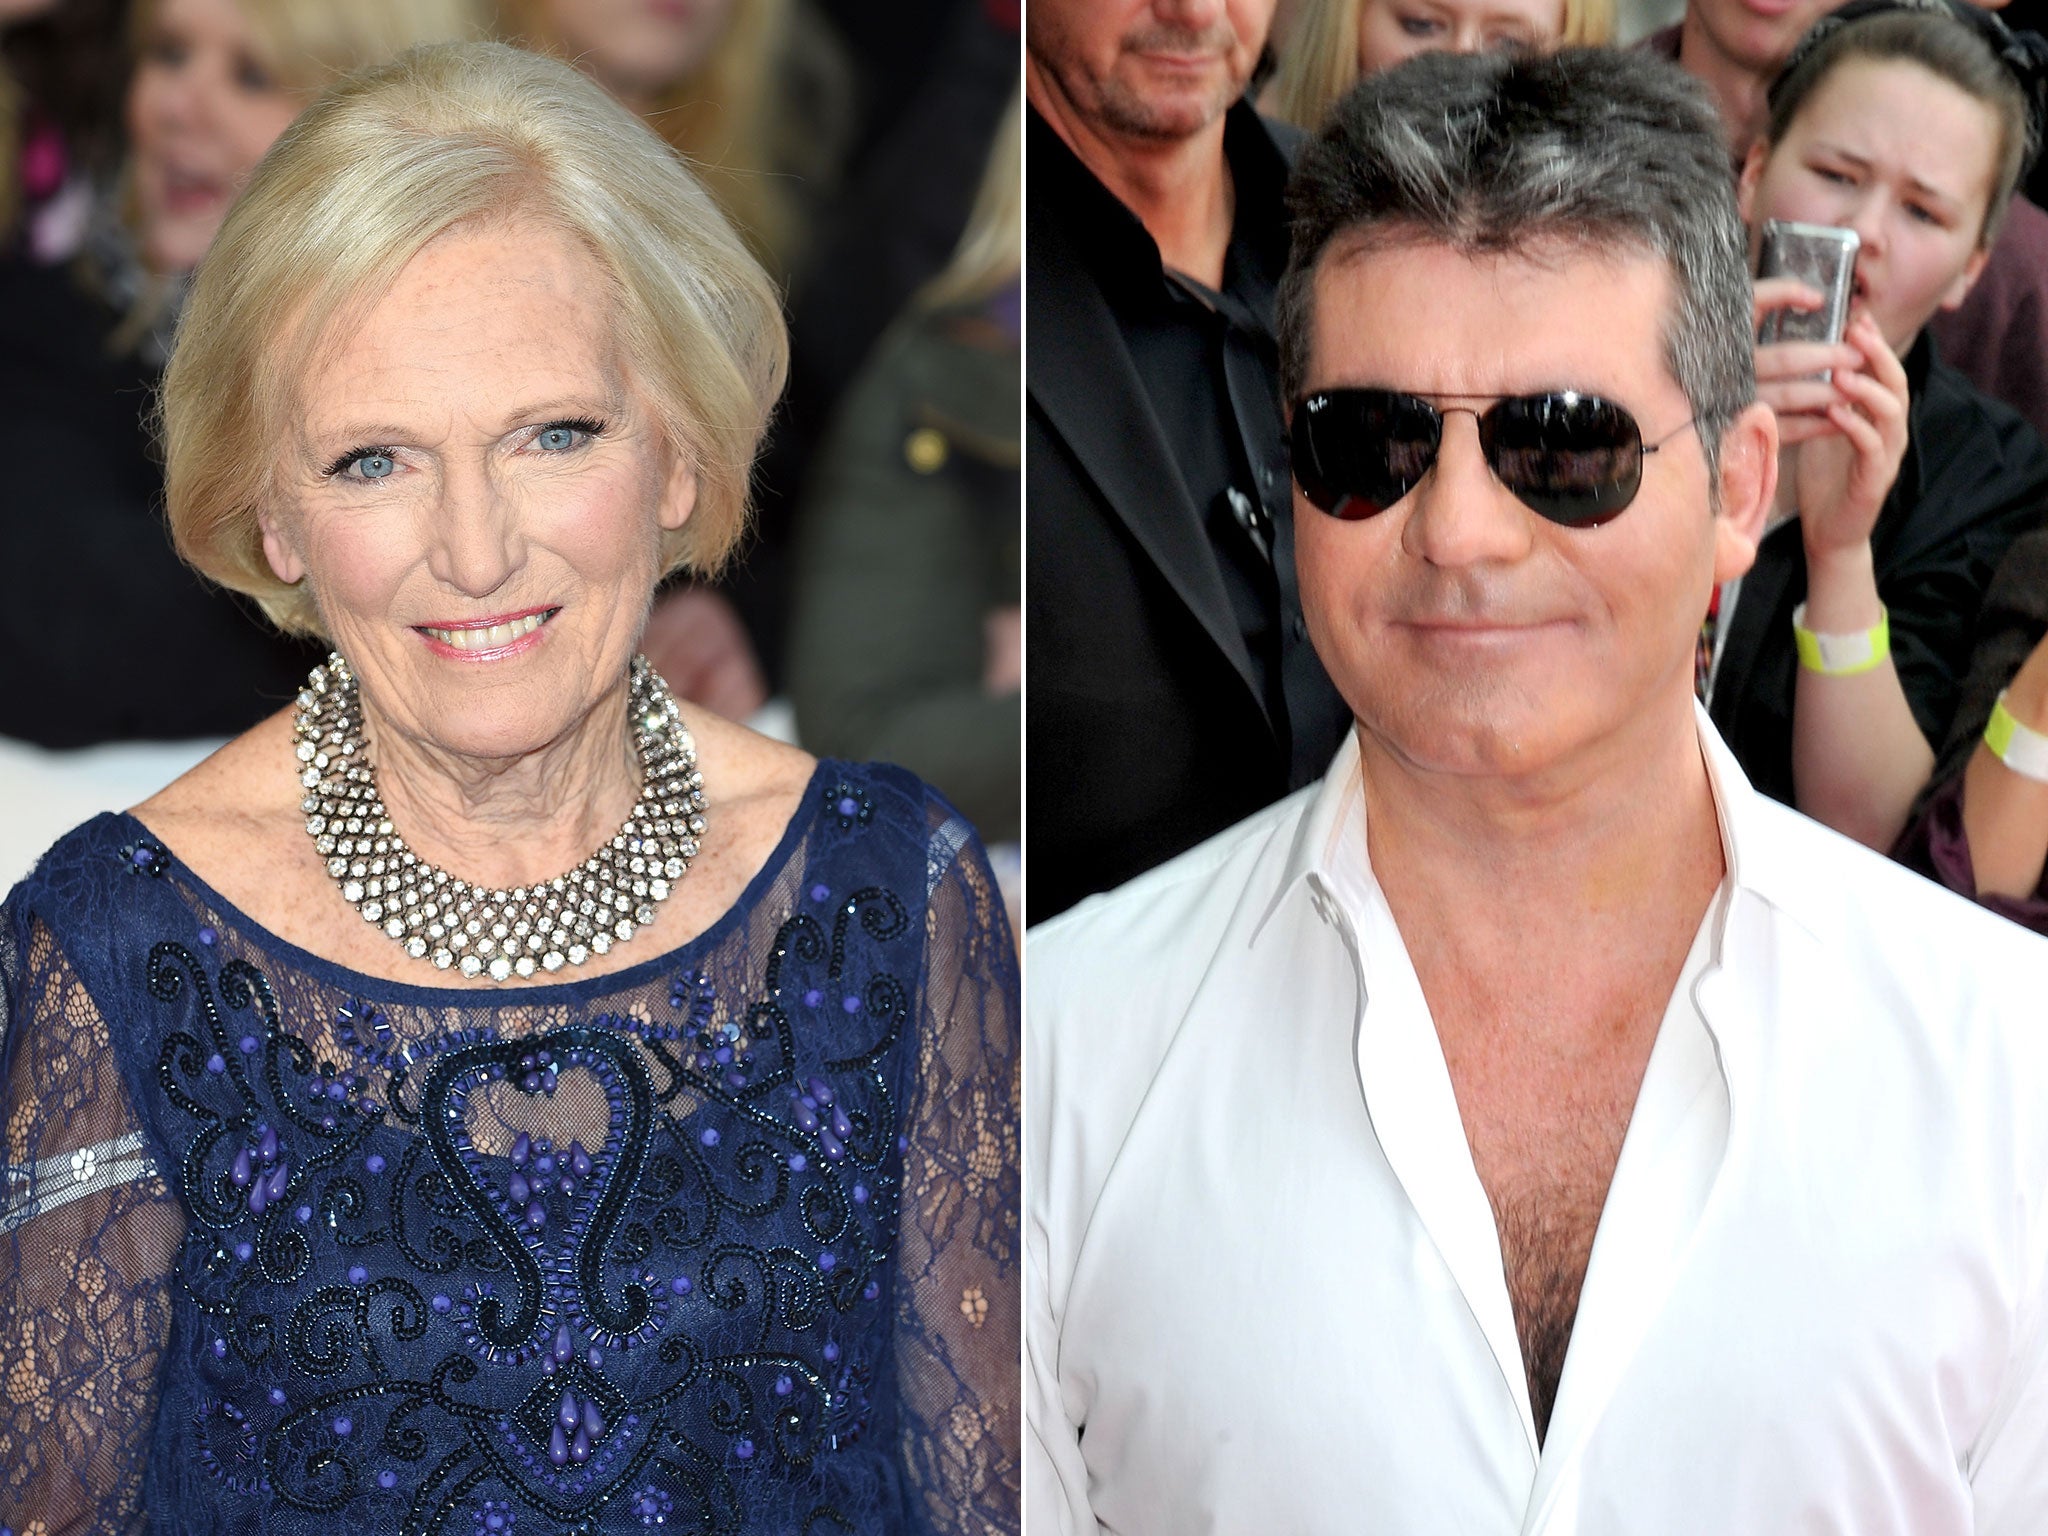 Bake Off's Mary Berry and X Factor's Simon Cowell will compete at the NTAs for Best TV Judge